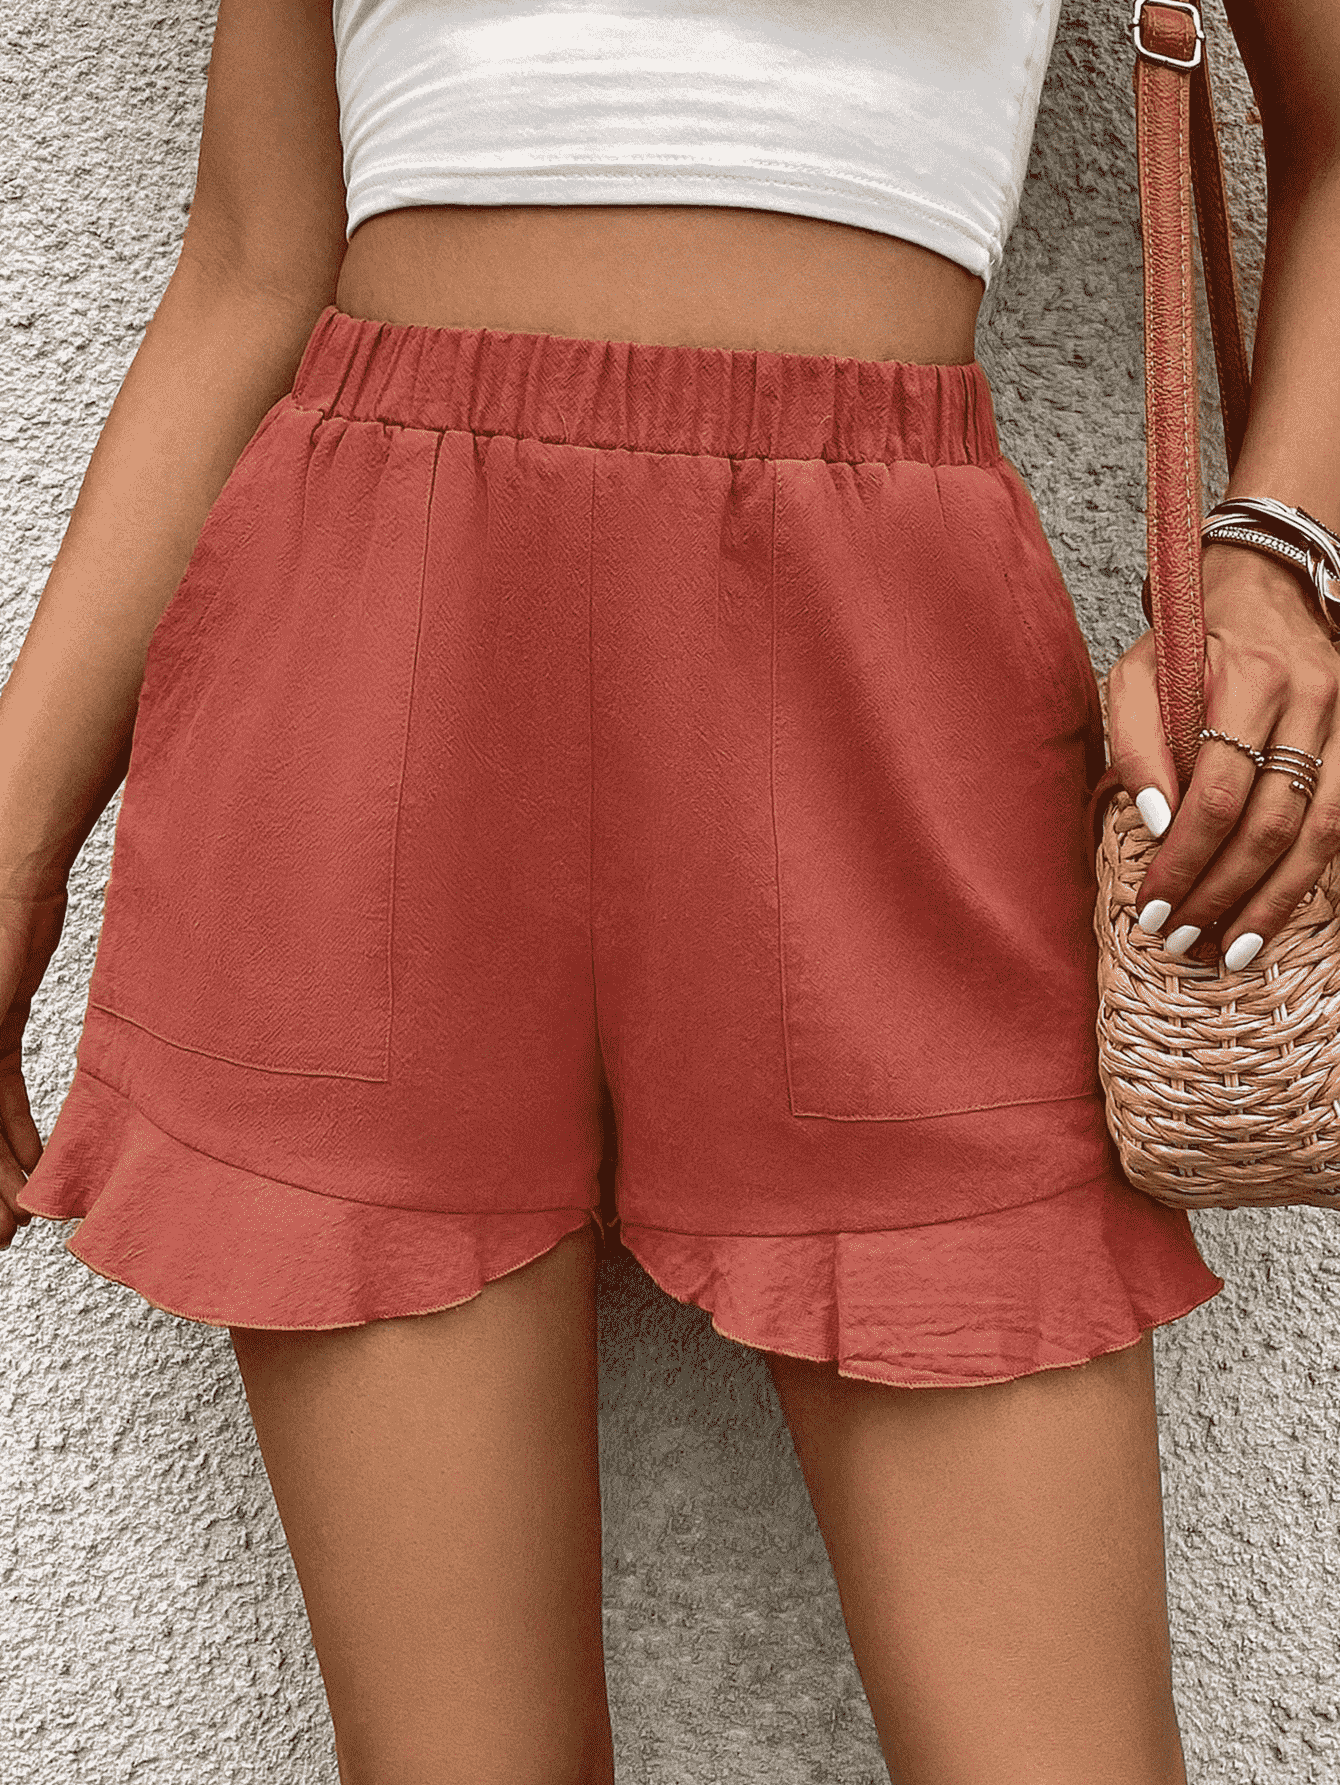 Ruffle Trim Shorts with Pocket - Women’s Clothing & Accessories - Shorts - 3 - 2024